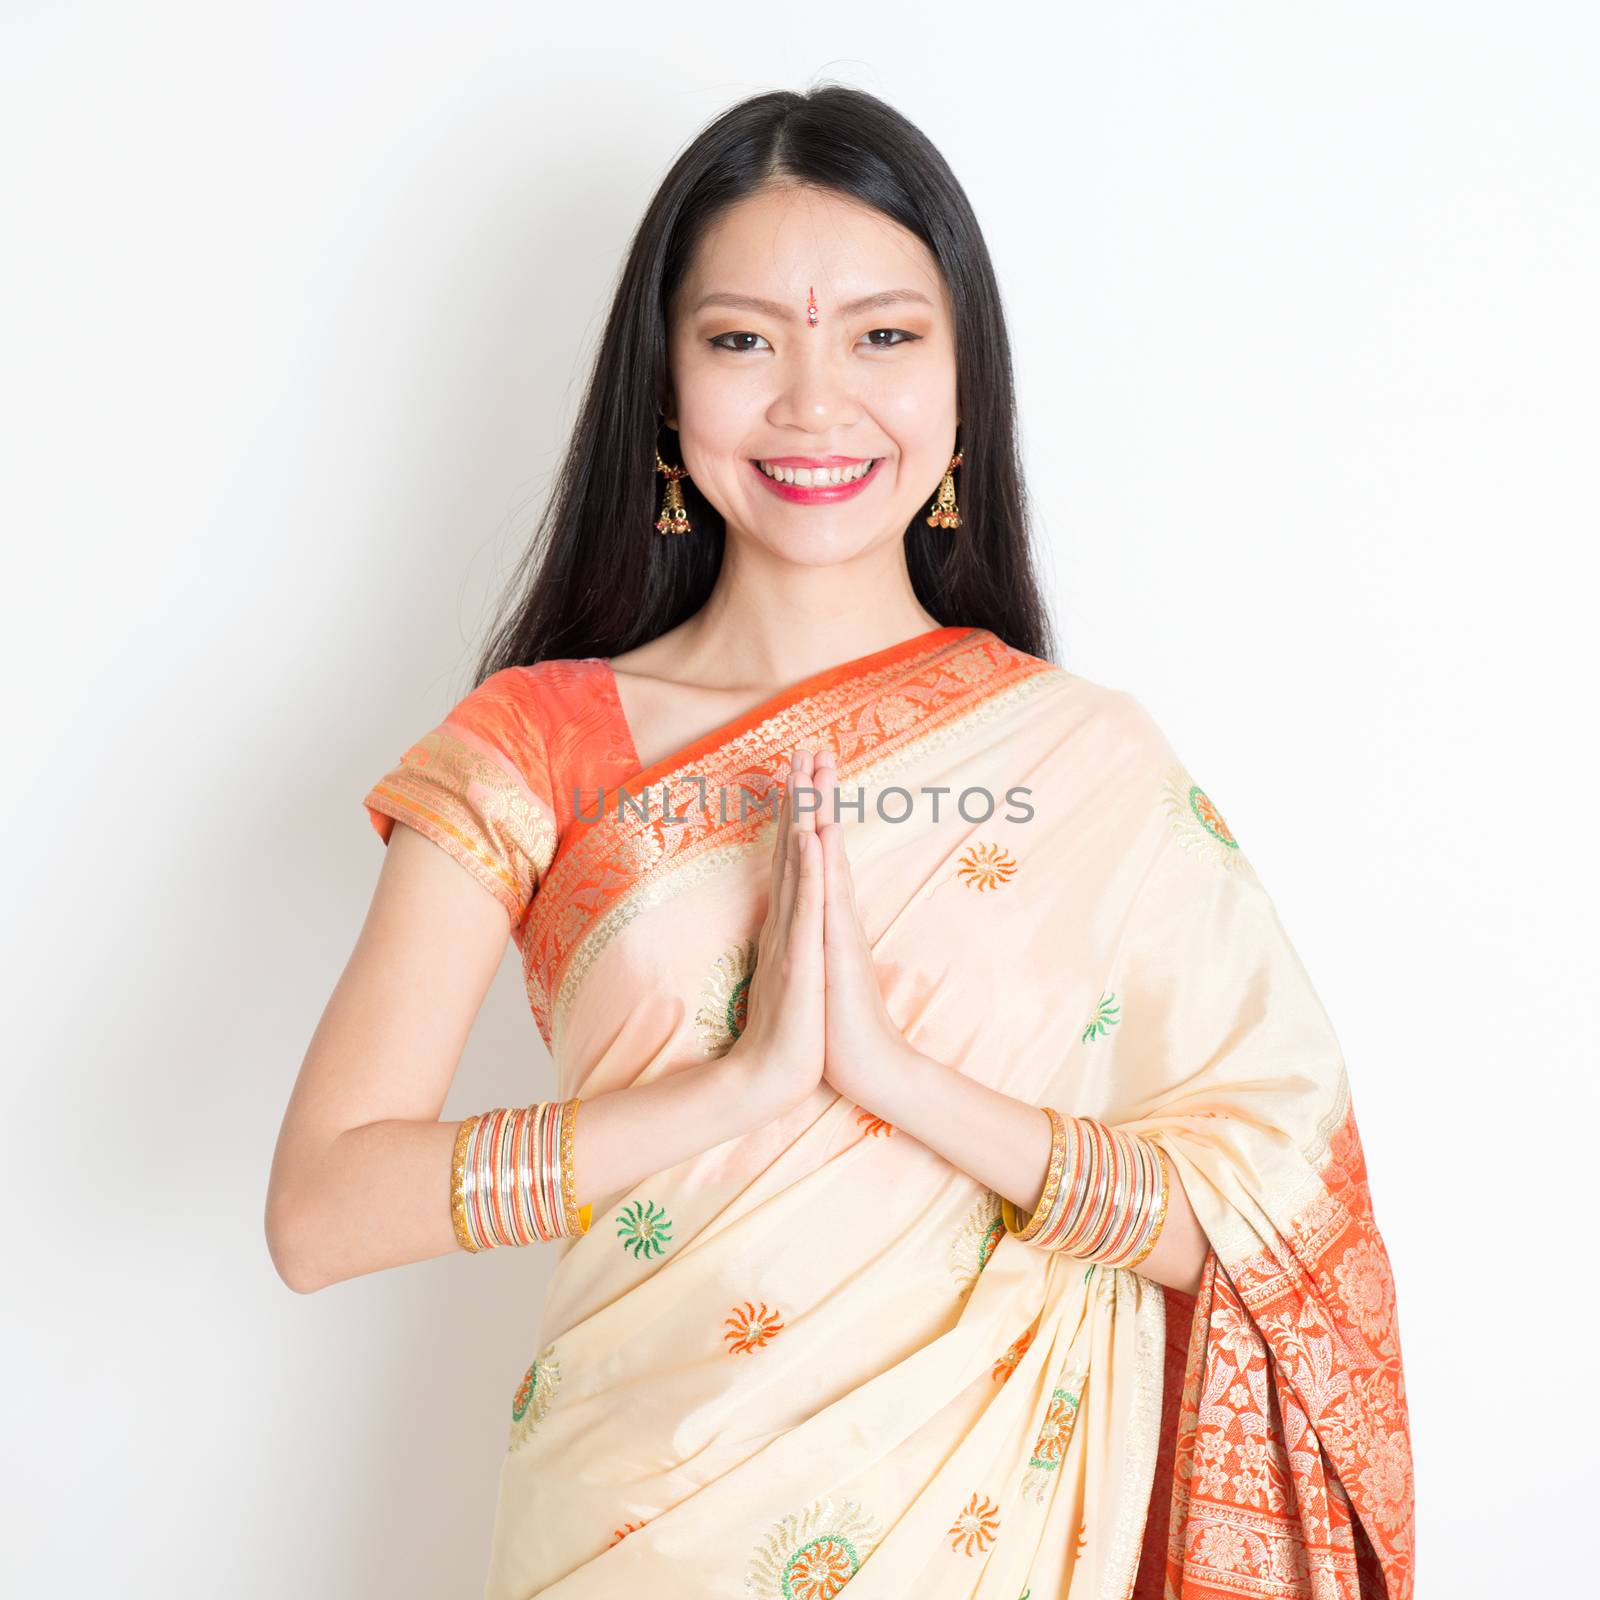 Woman with Indian greeting pose by szefei